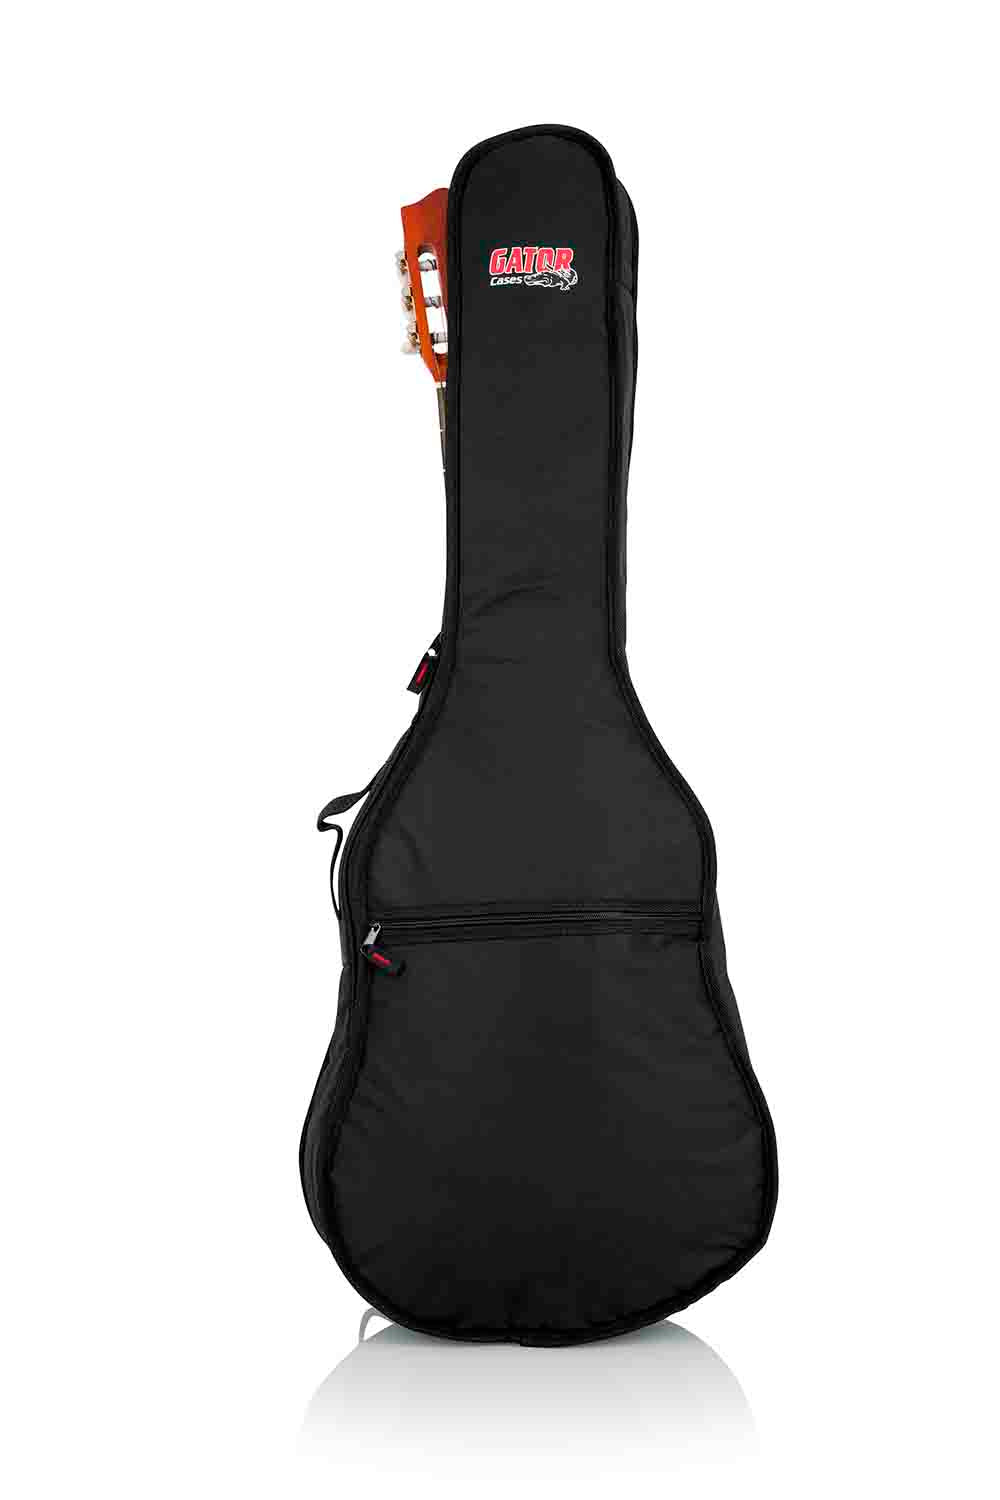 Gator Cases GBE-CLASSIC Gig Bag for Classical Guitars - Hollywood DJ